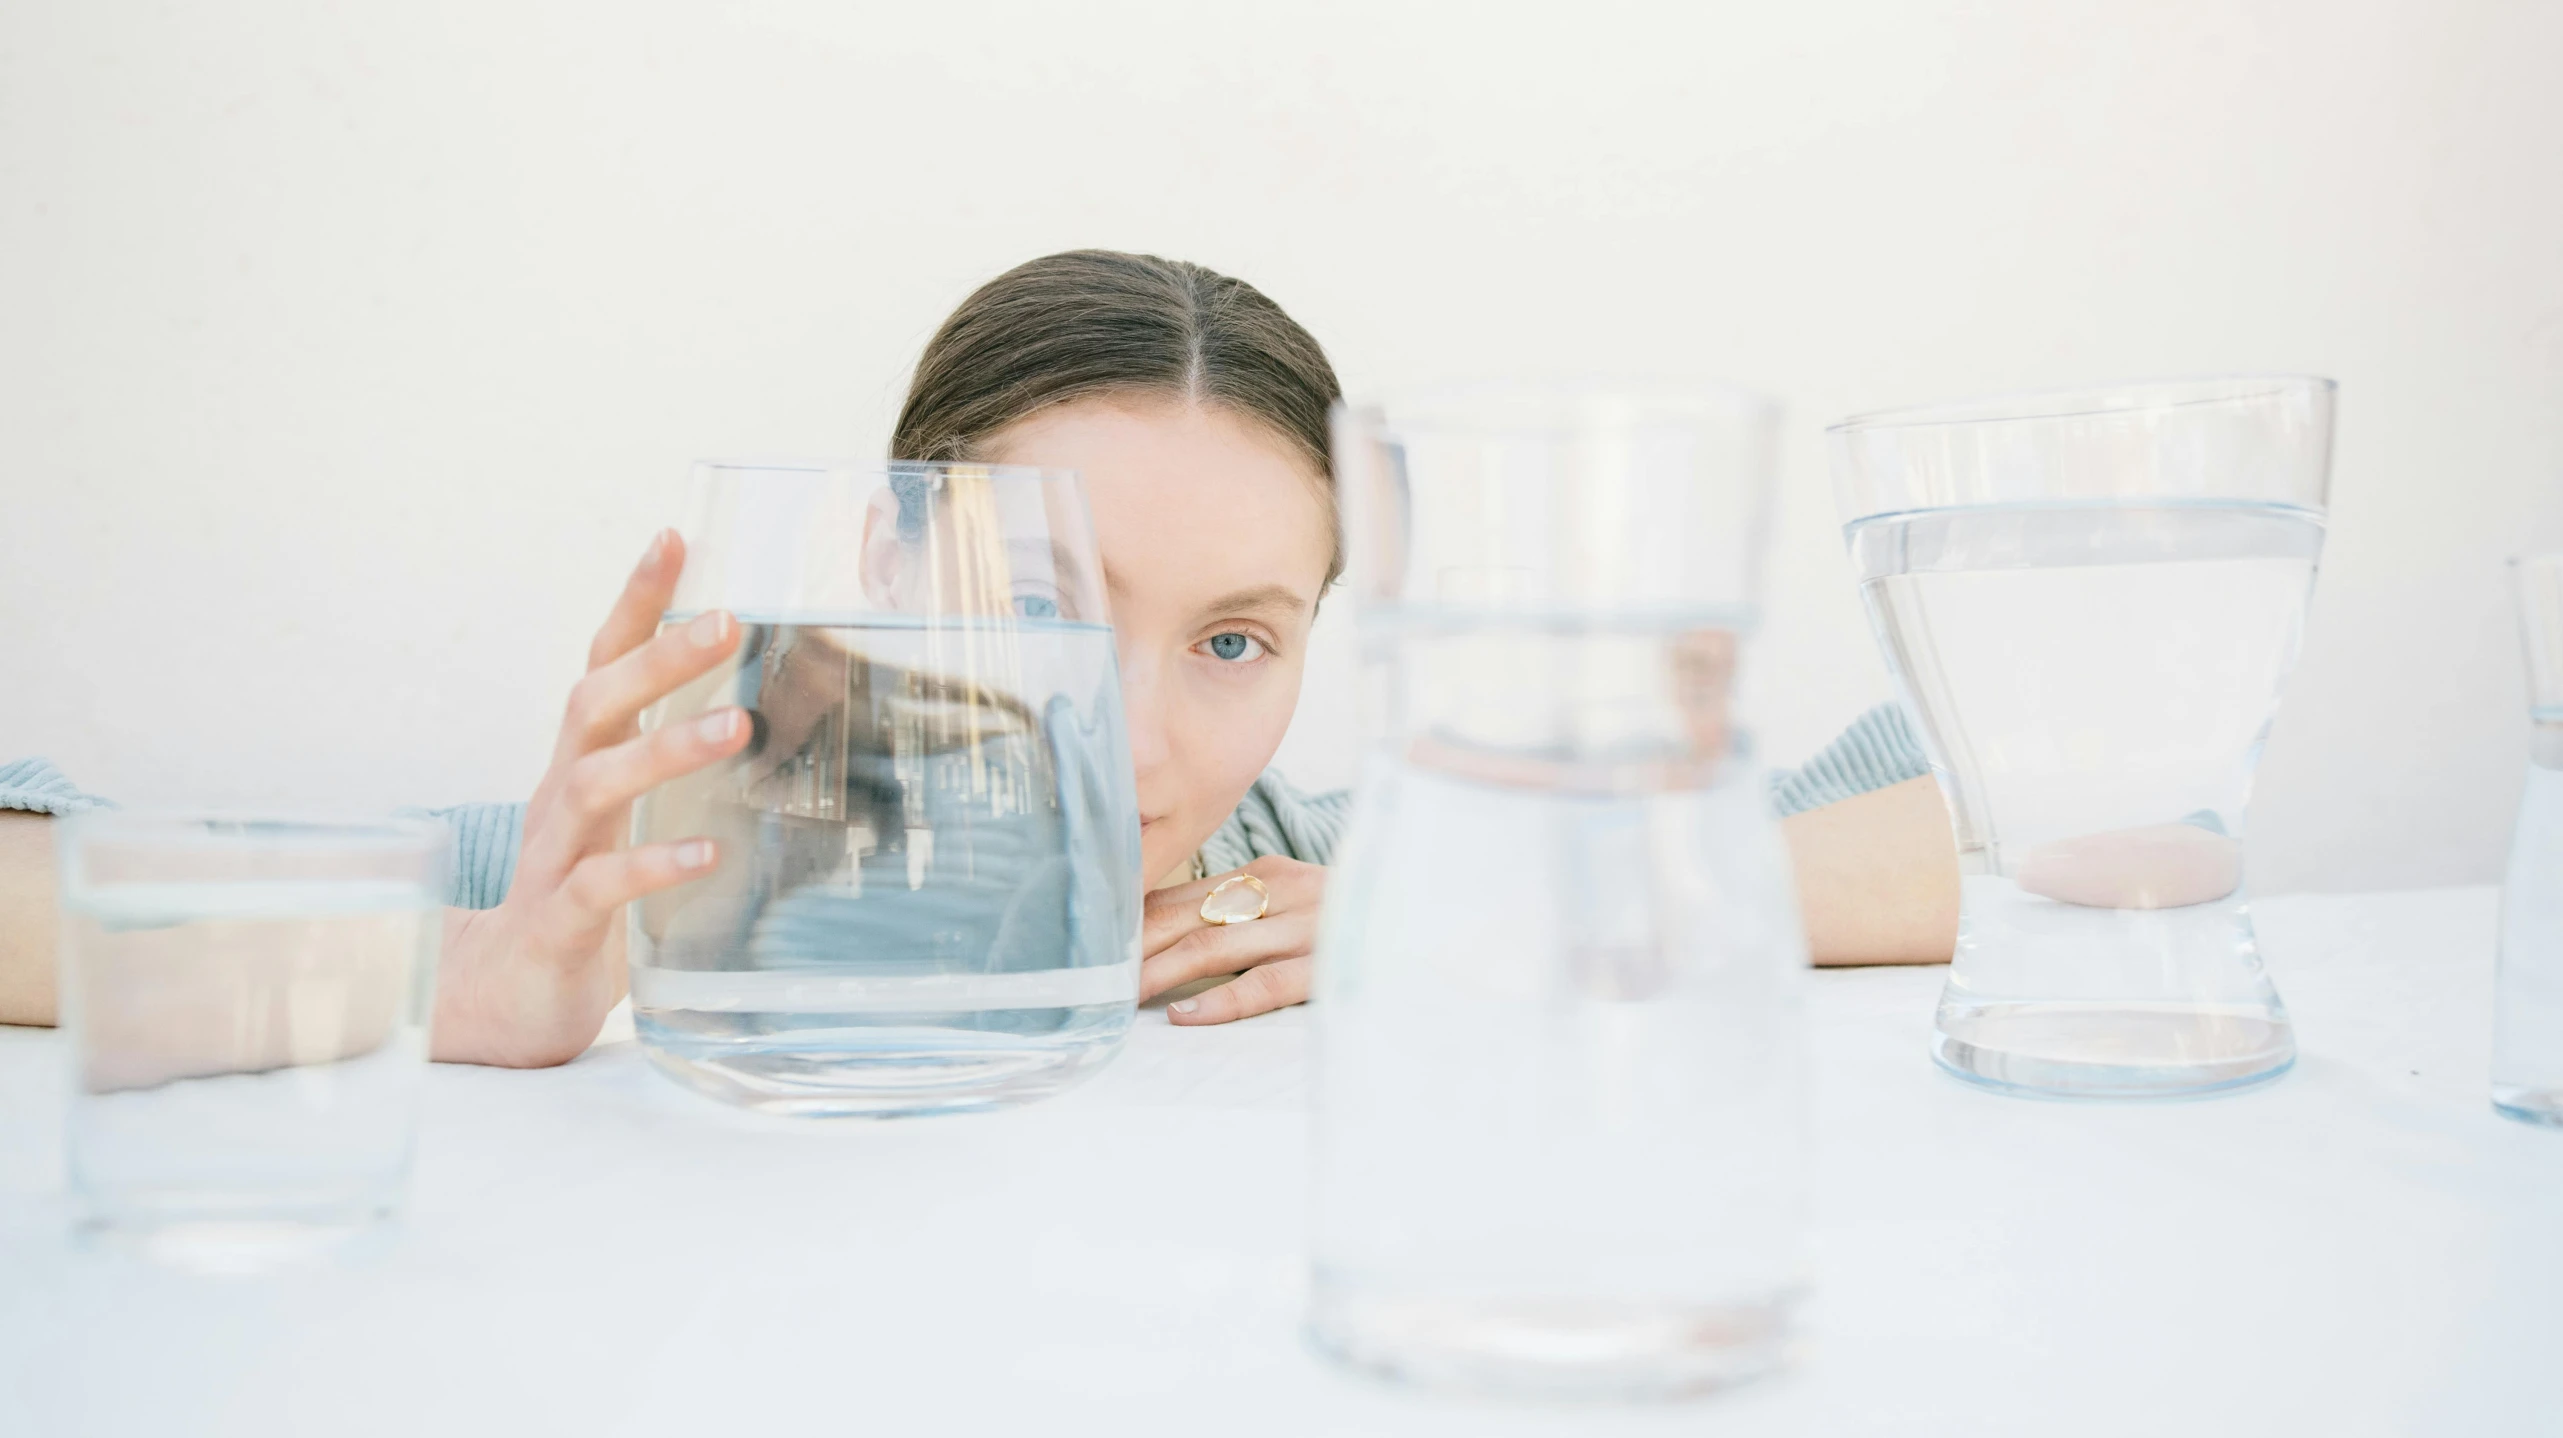 the woman sits behind many water glasses with a reflection